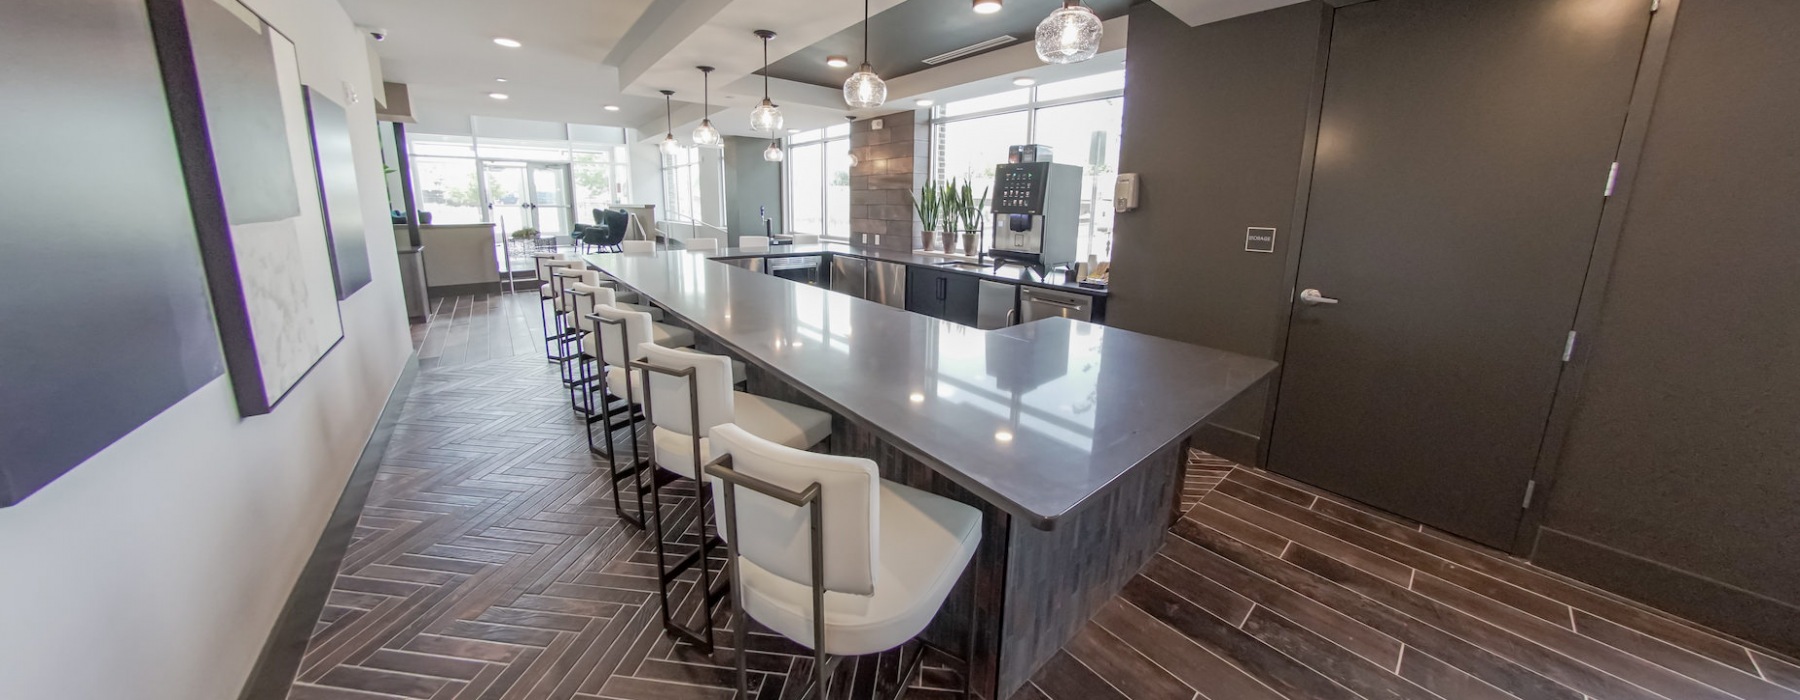 Coffee bar at 500 West Trade Apartments in Uptown Charlotte, NC